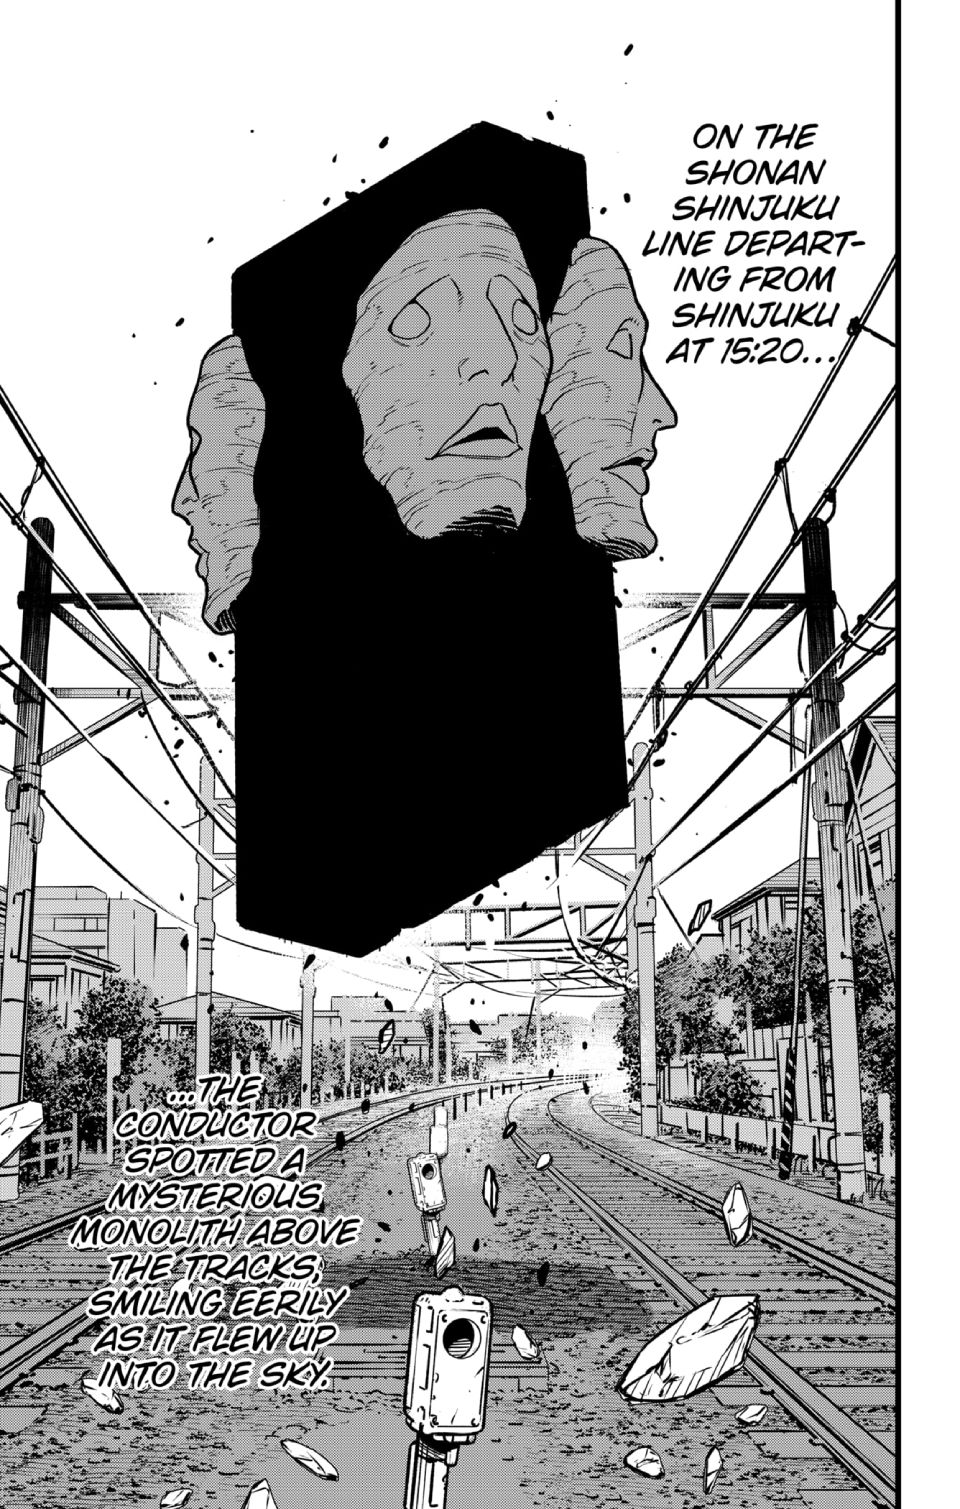 Kaiju No. 8 Chapter 68, monster #8 chapter 68